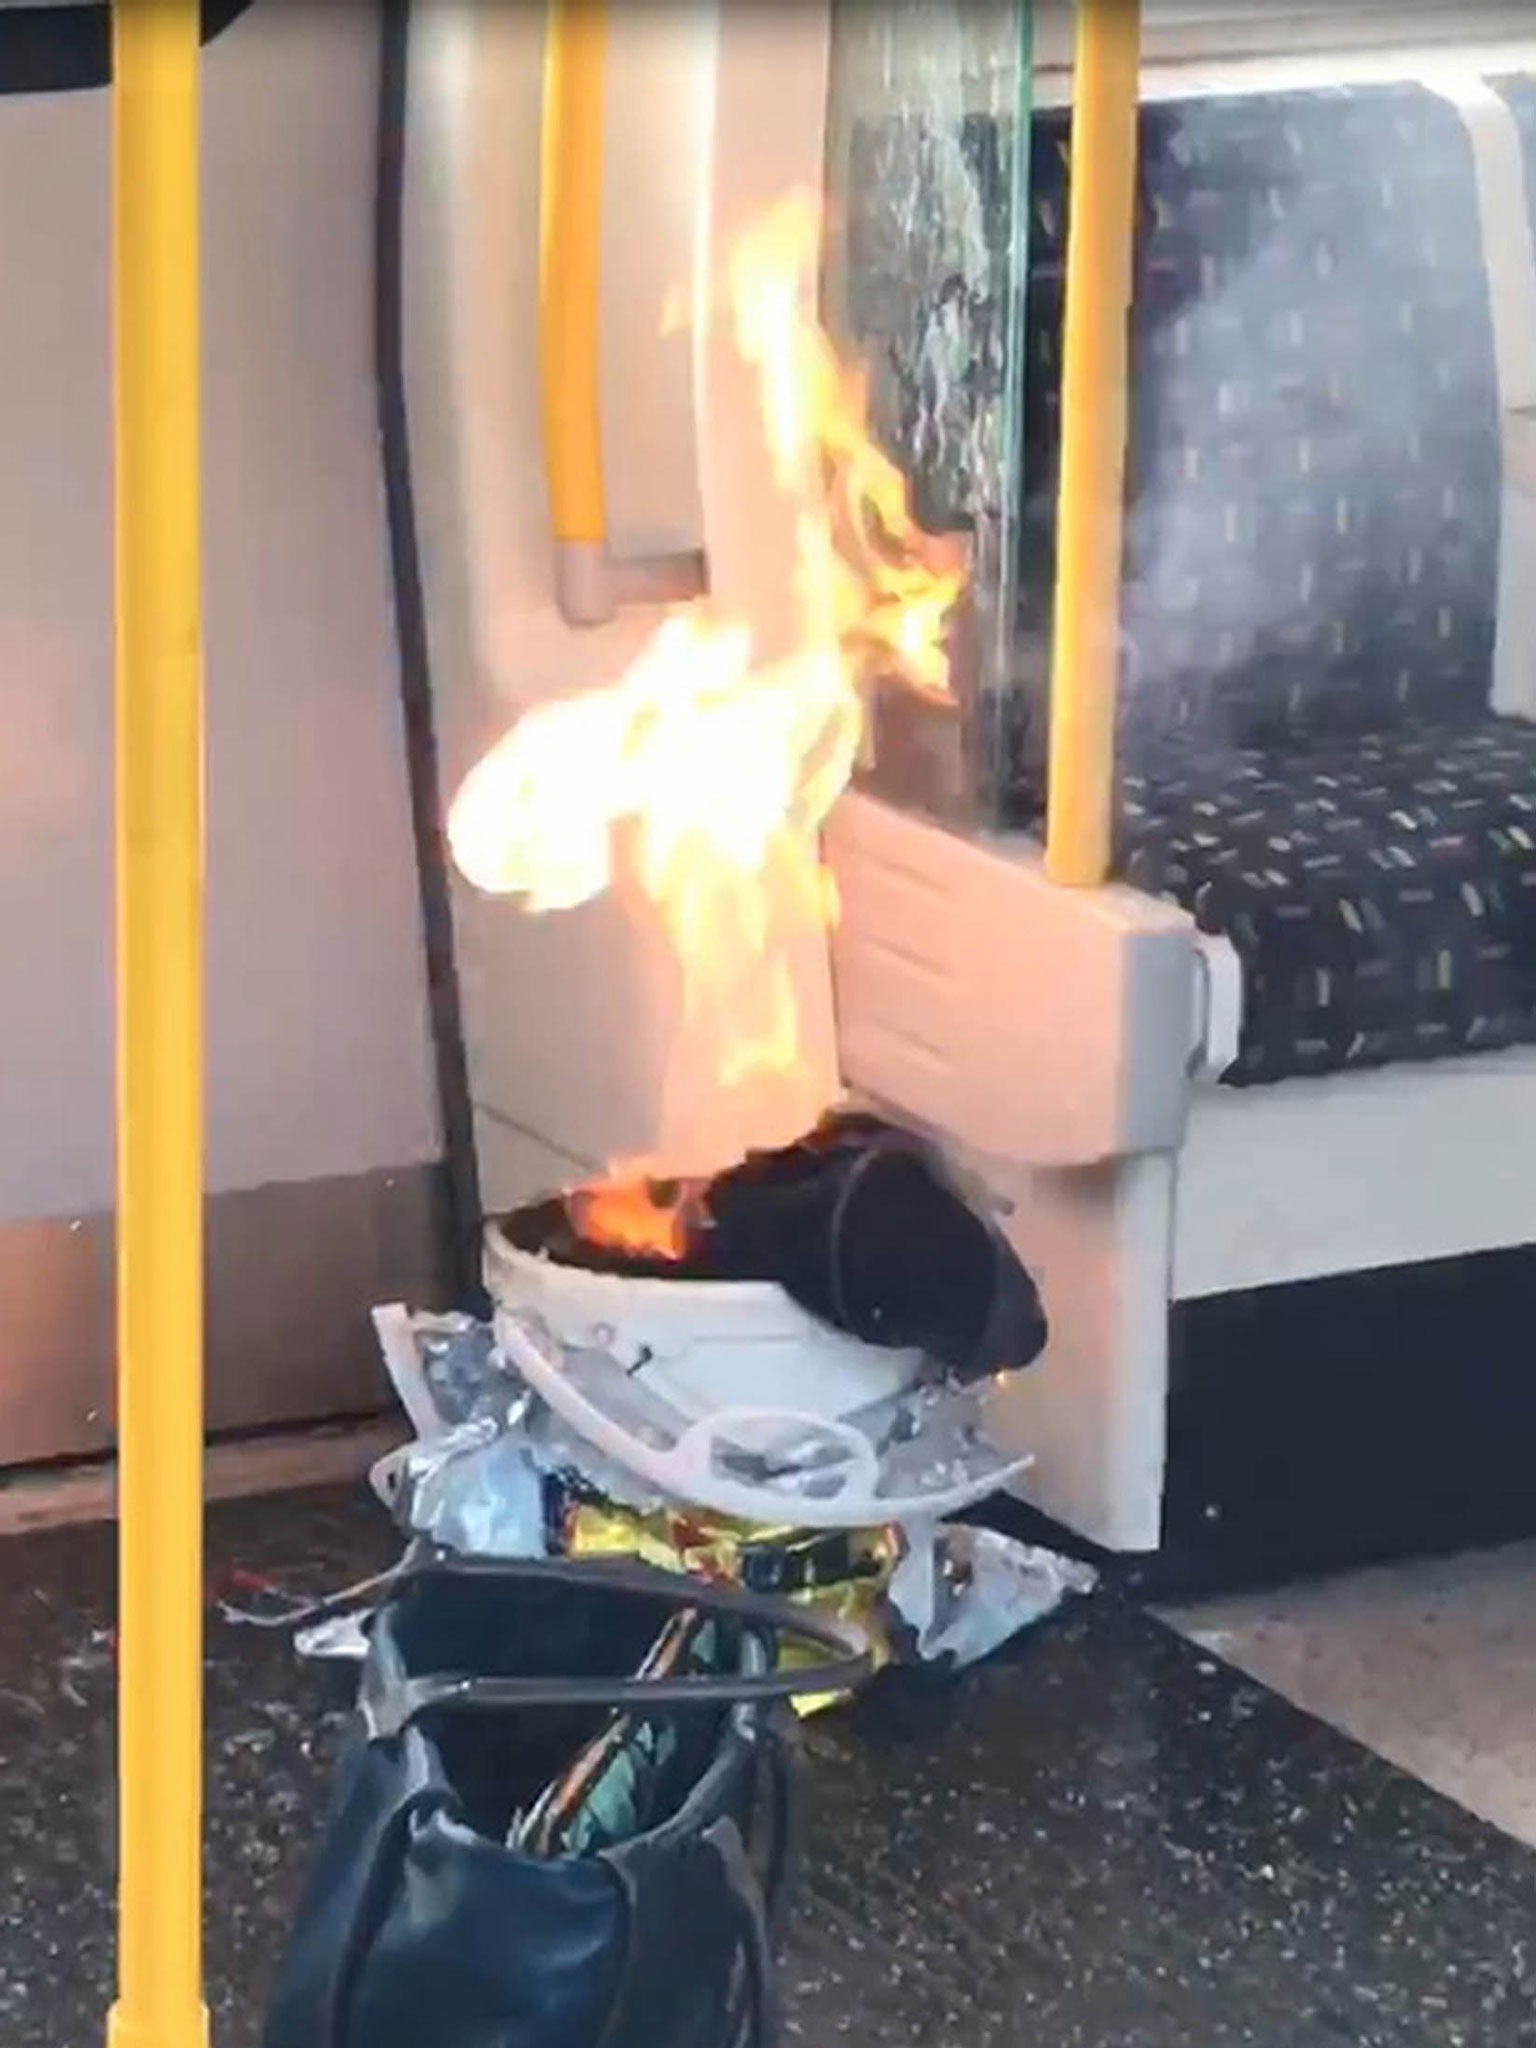 The device after it exploded on the District Line train at Parsons Green underground station on 15 September